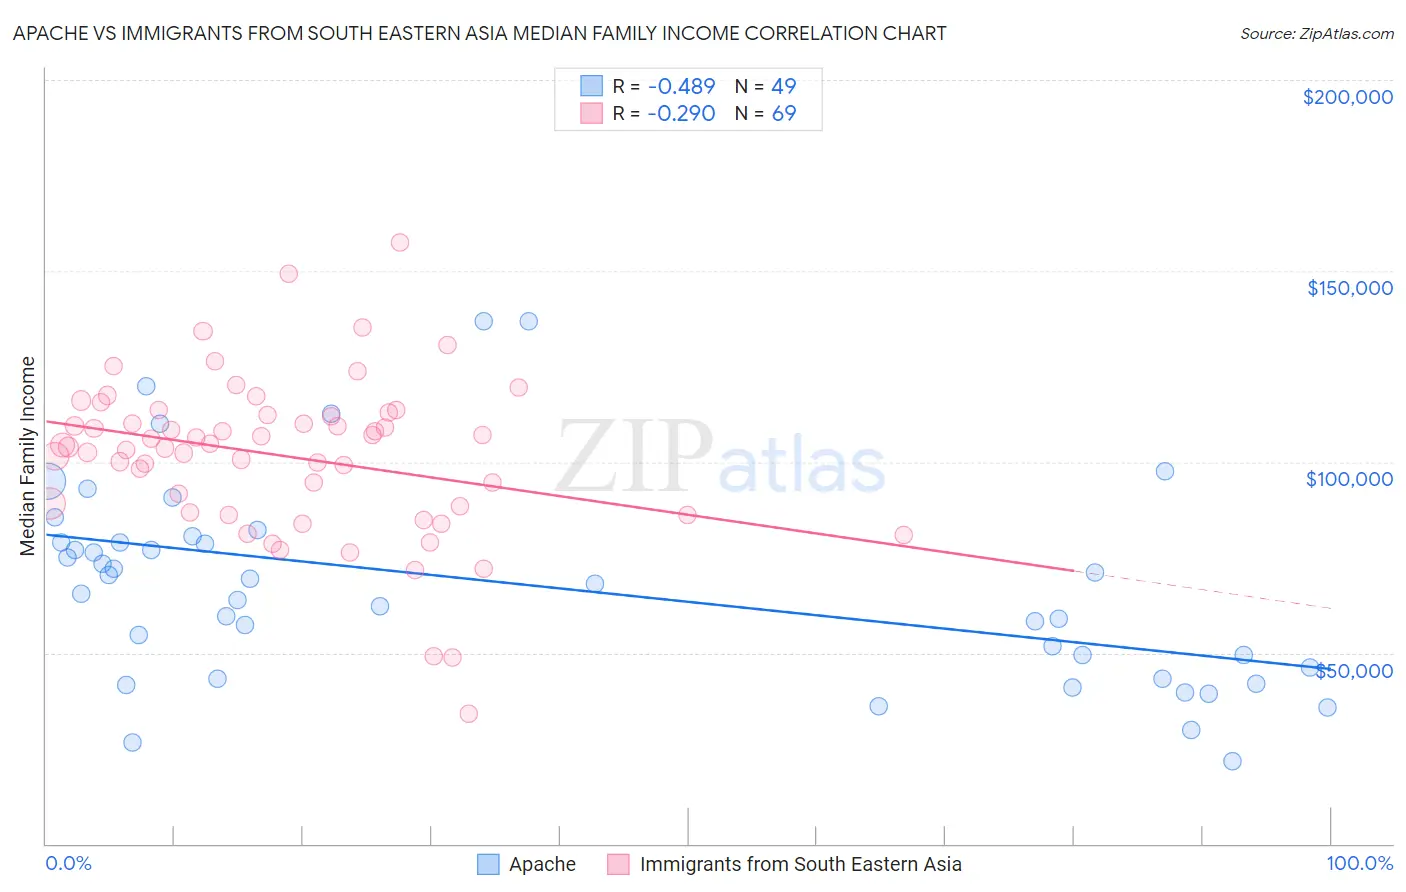 Apache vs Immigrants from South Eastern Asia Median Family Income